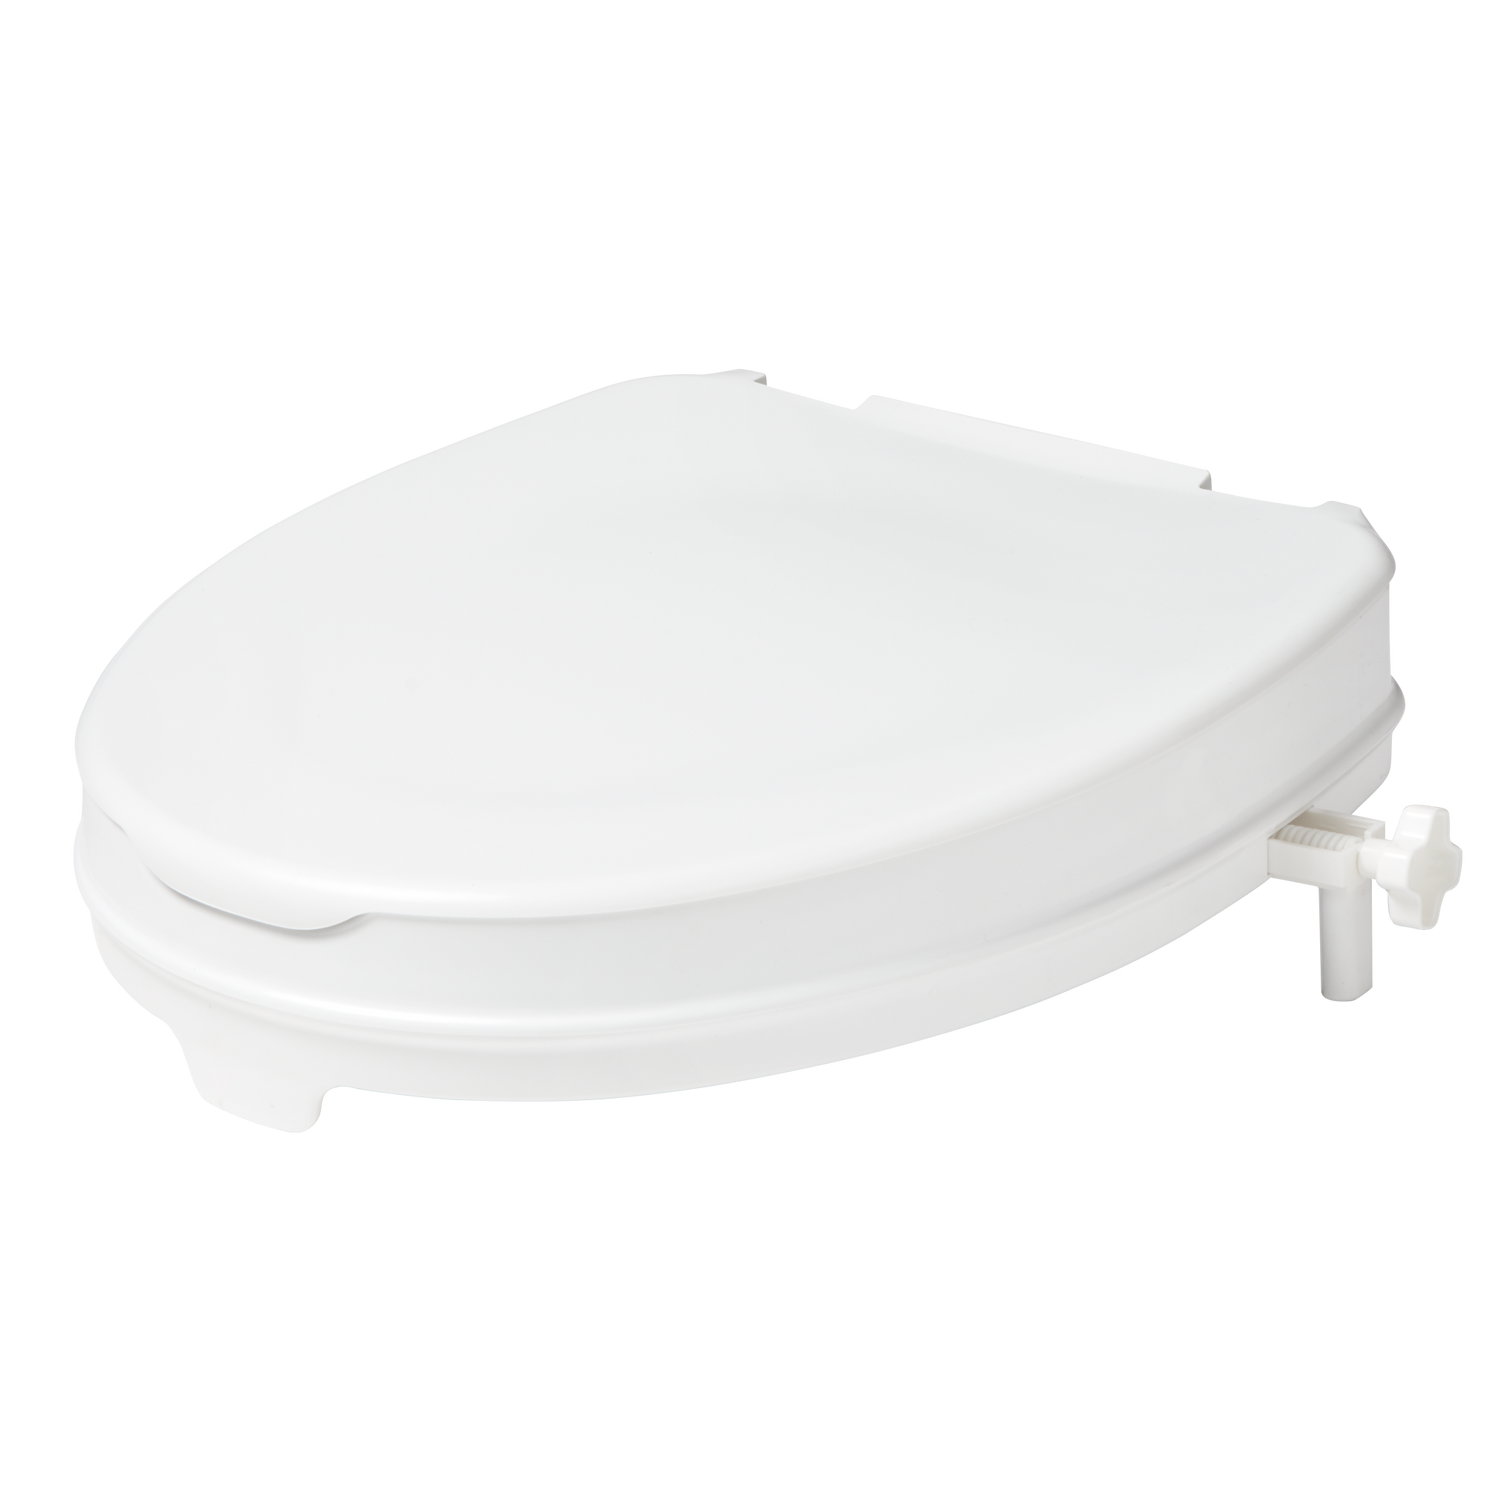 SecuCare Toilet seat raiser with lid